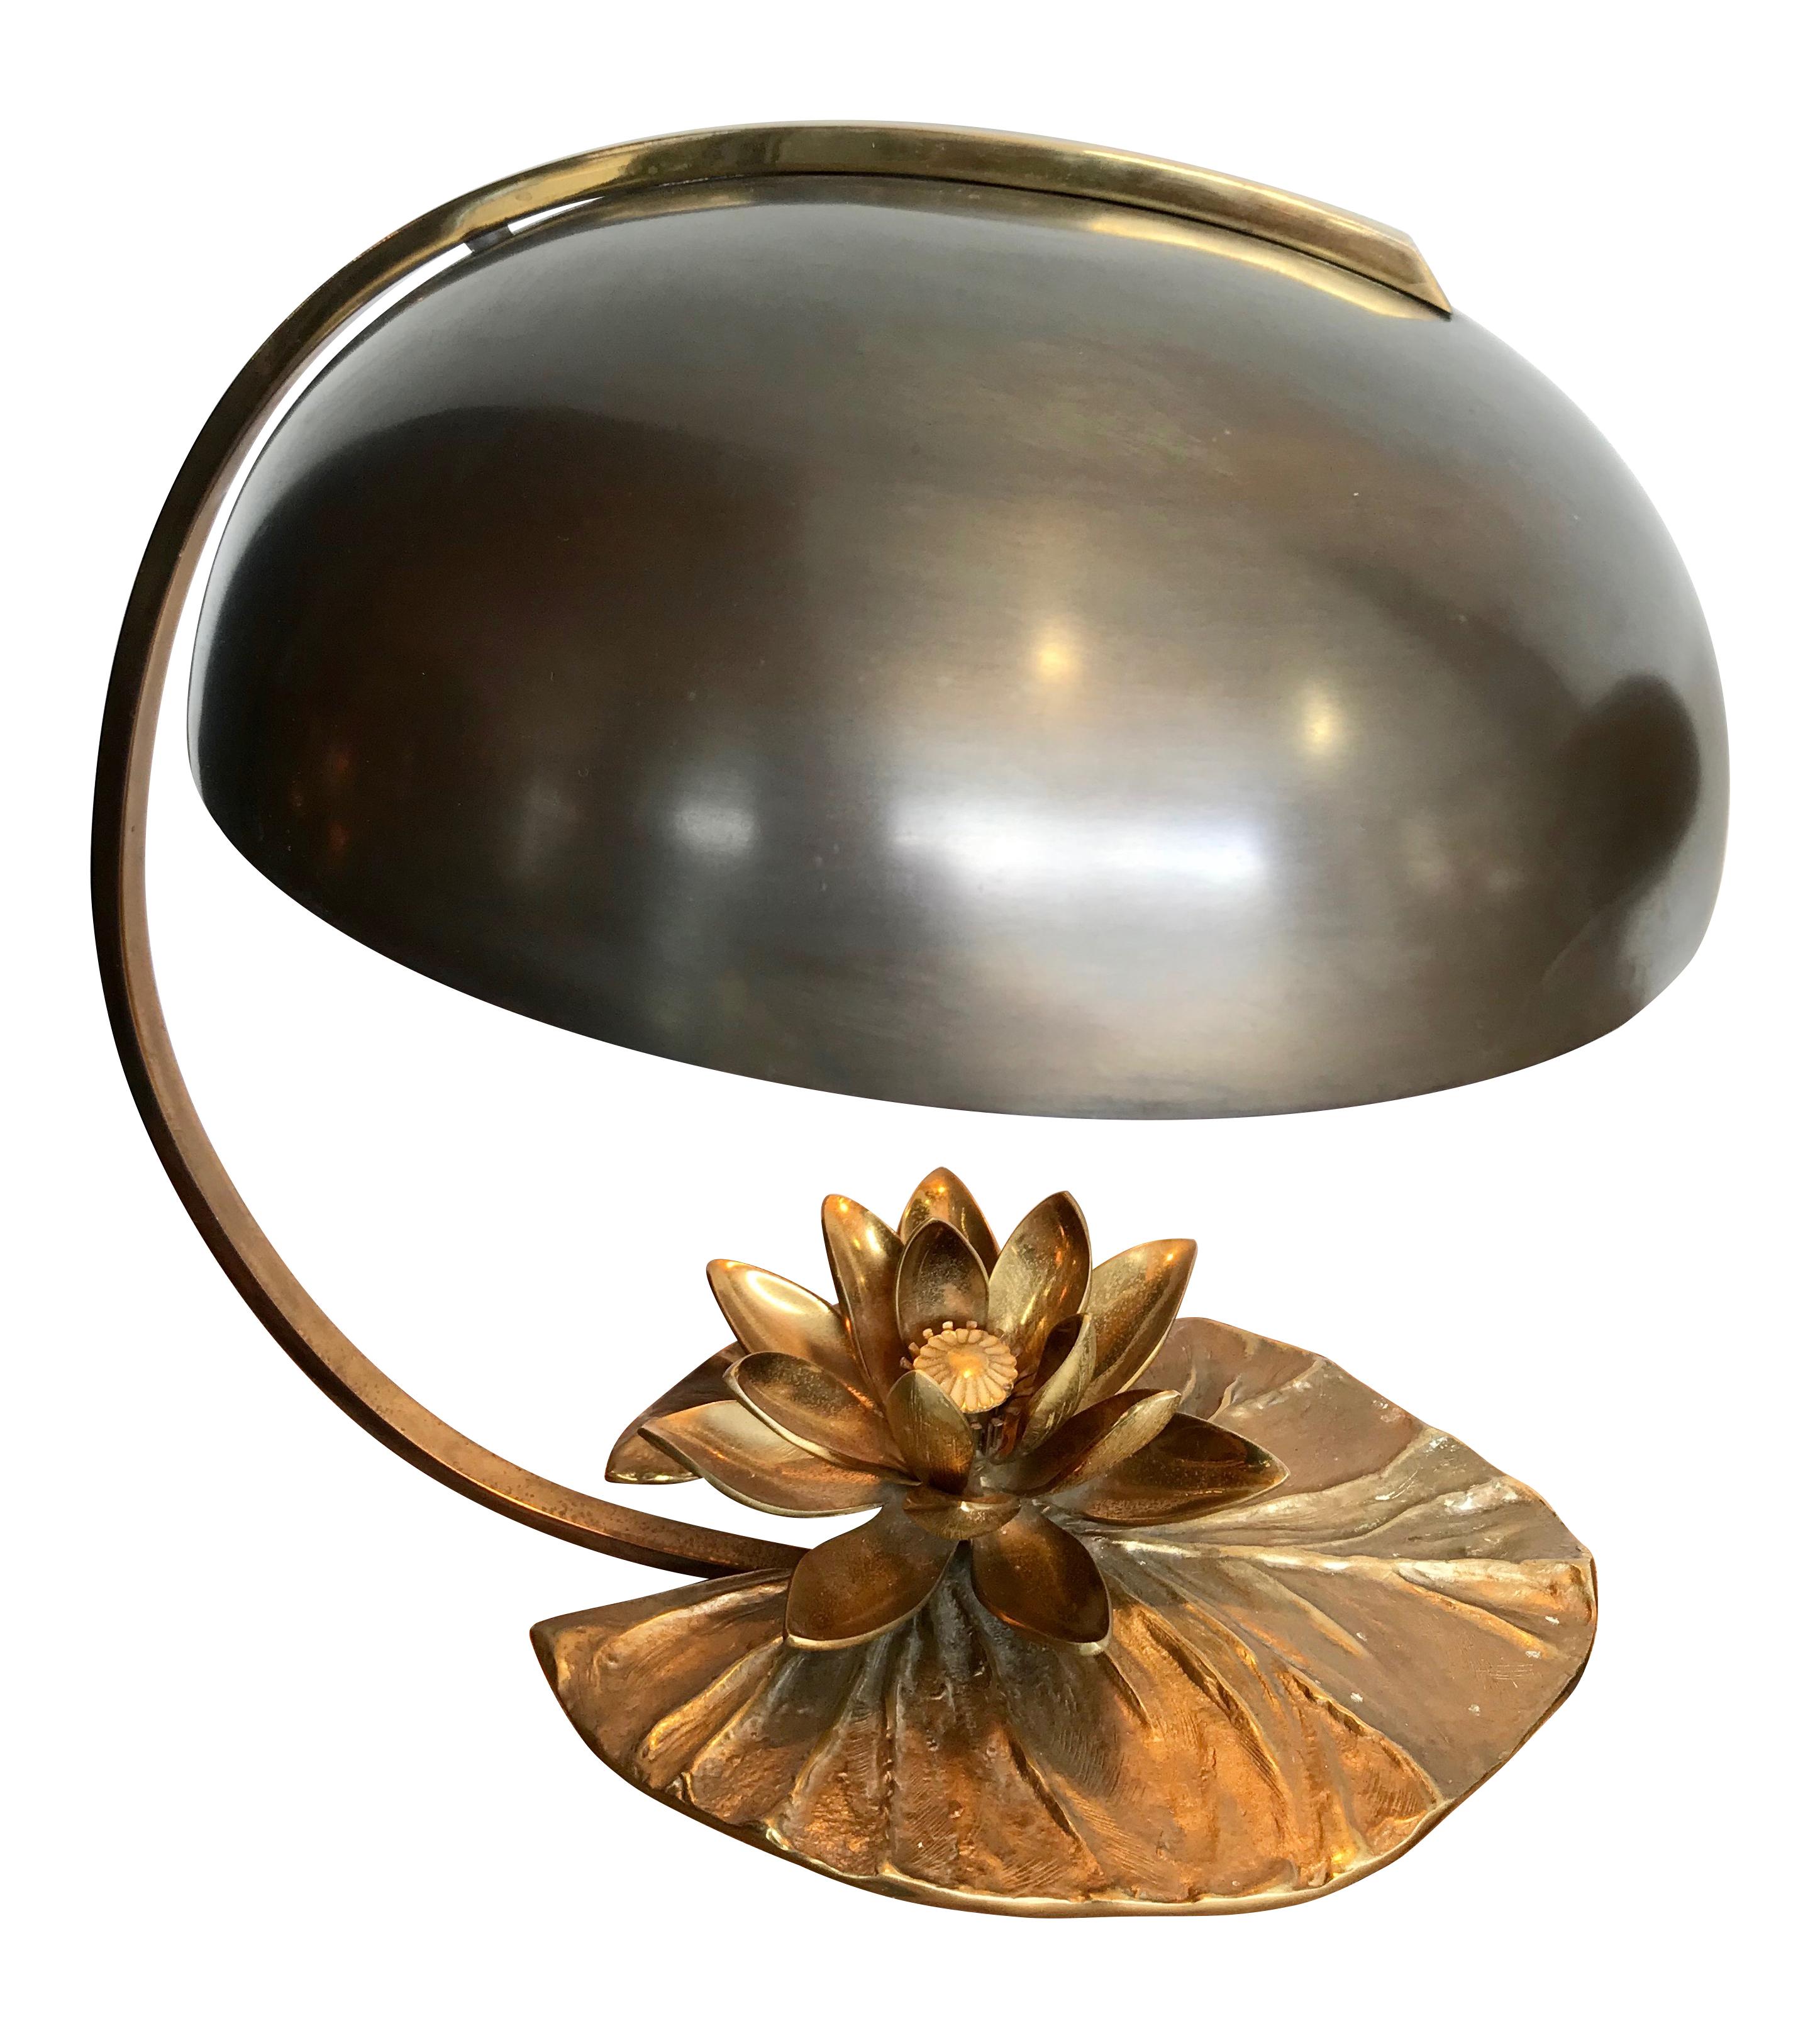 A Maison Charles “Nenuphar” bronze lamp designed and signed twice in the mould by Chrystiane Charles on the top and bottom of the lily pad leaf. She designed and made all the original clay moulds herself and only the earlier ones have the signature